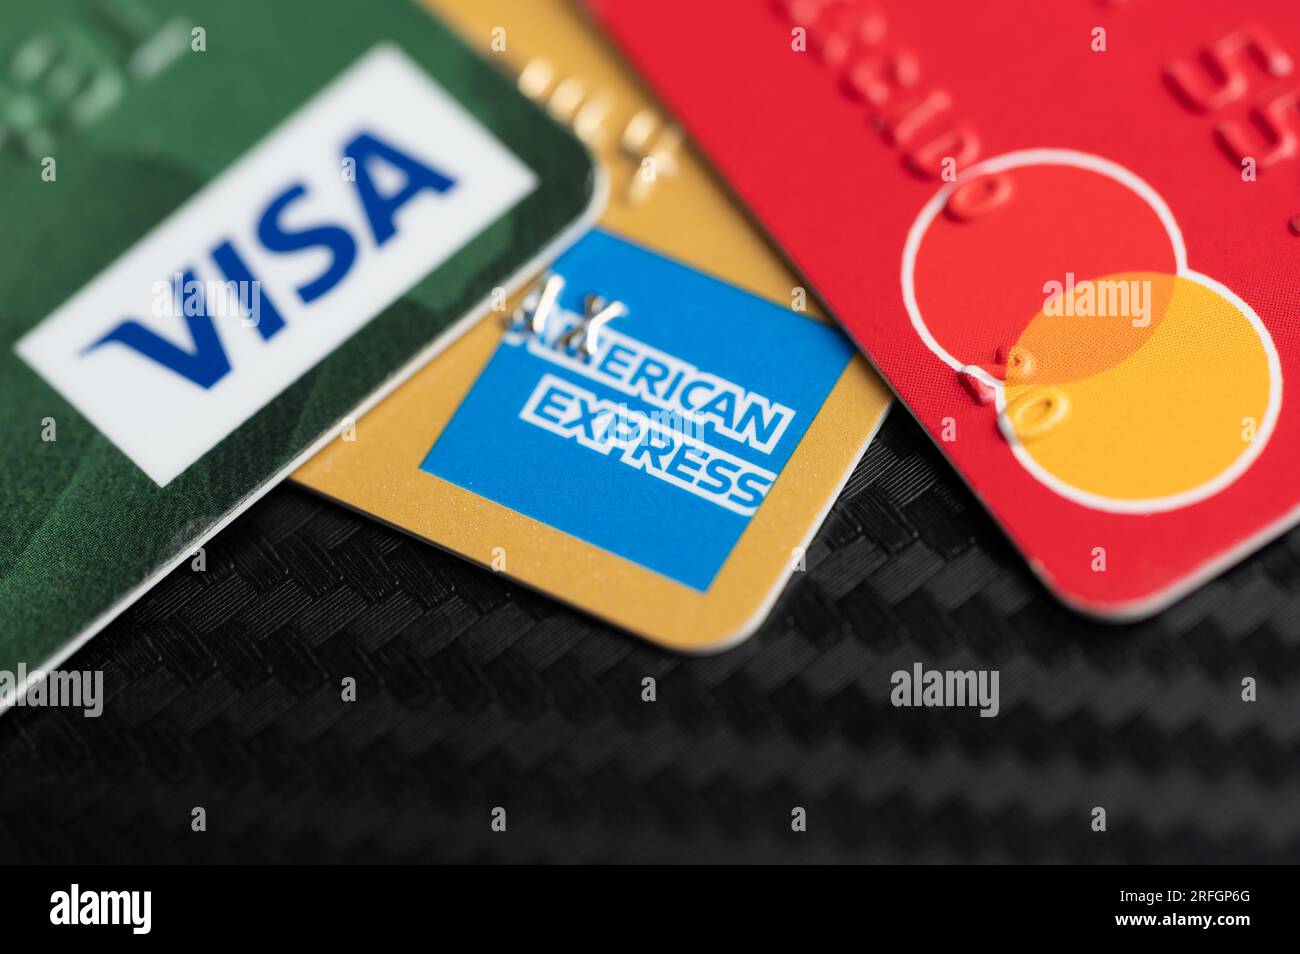 New York, USA - August 2, 2023: Visa master and american express debit cards on black table clsoe up view Stock Photo